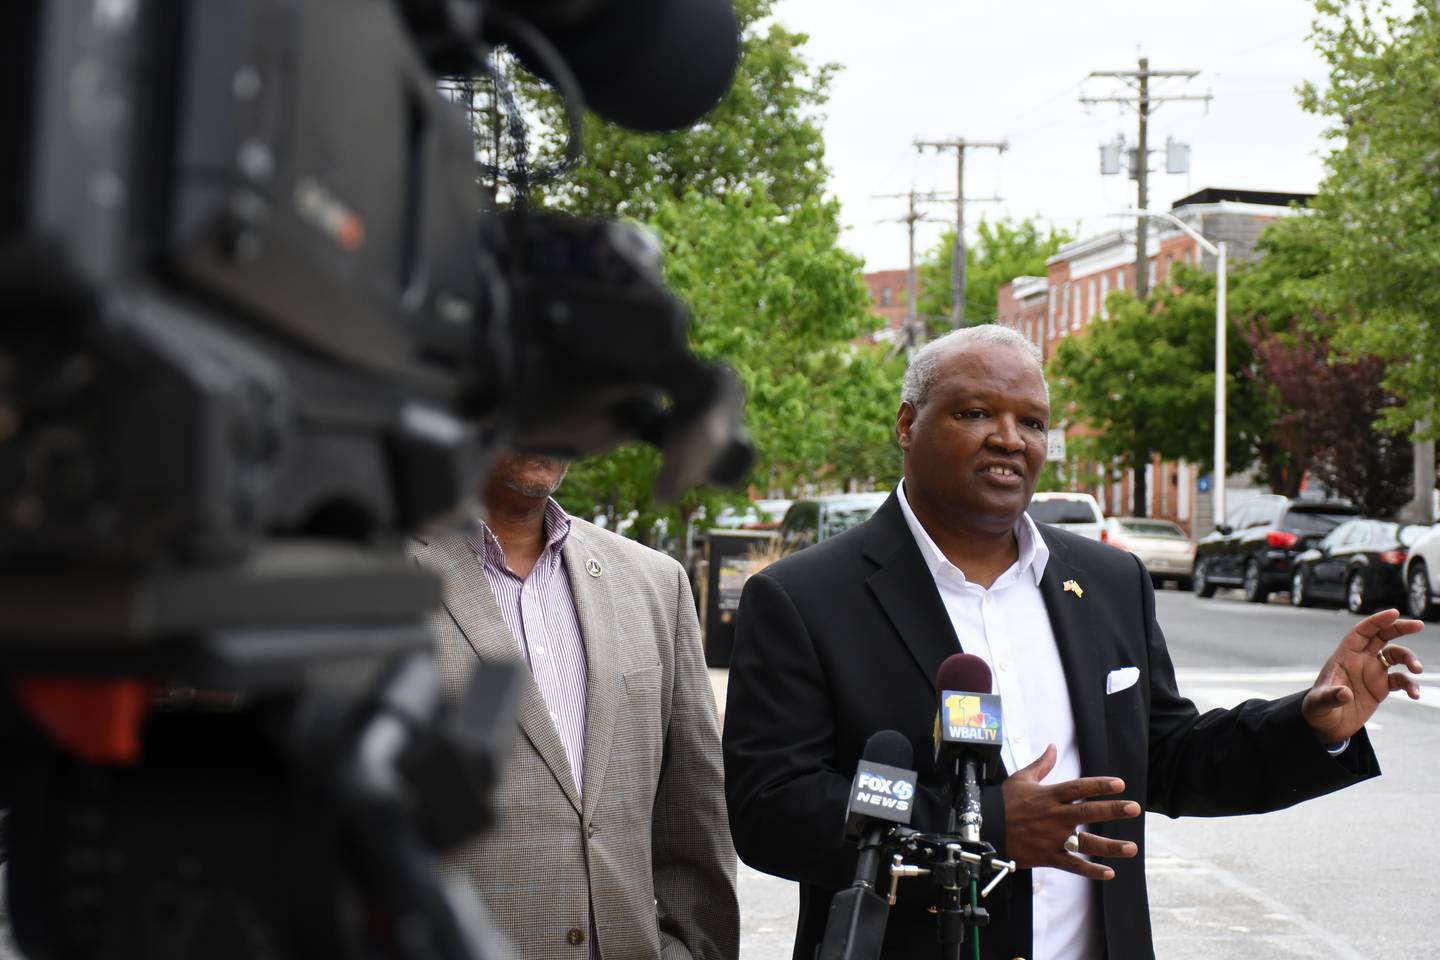 Rushern L. Baker III holds a news conference in Baltimore's Pigtown neighborhood on May 5, 2022 to discuss issues with dirt bike riders. At the time, Baker was actively campaigning for governor as a Democrat. He has since suspended his campaign.